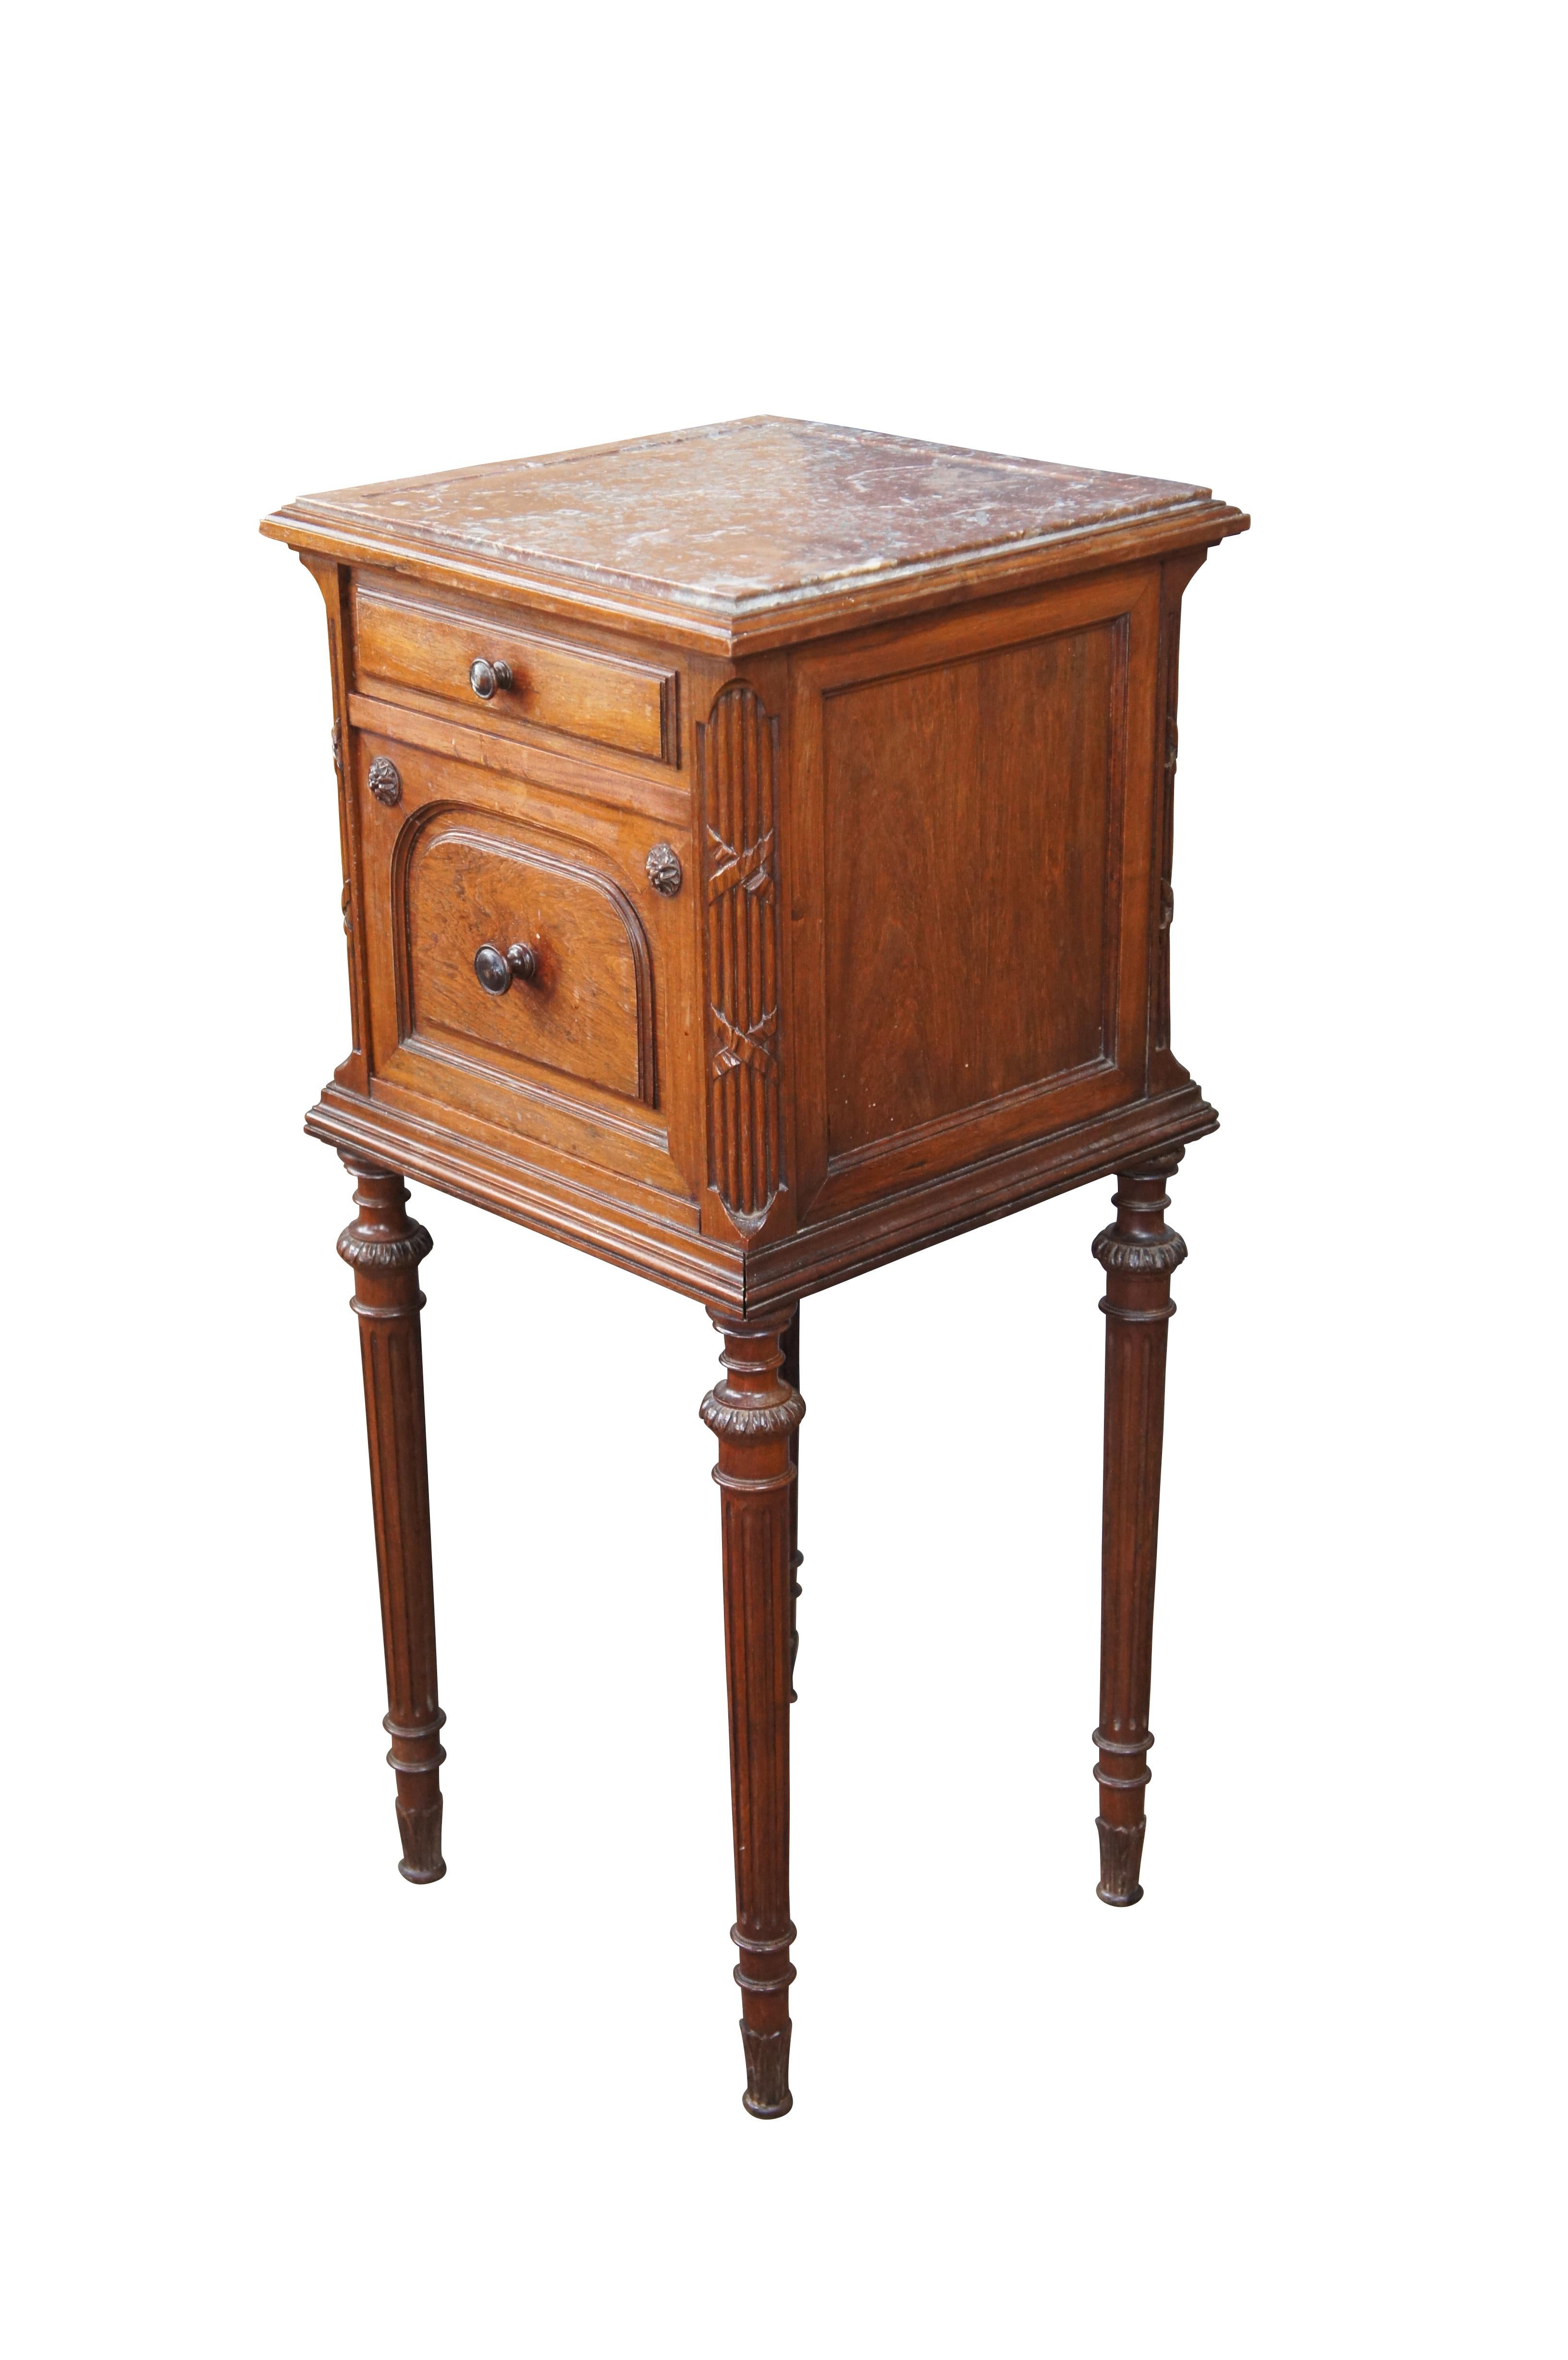 Antique 19th C. French Louis XVI Walnut Bedside Cabinet Nightstand End Table In Good Condition For Sale In Dayton, OH